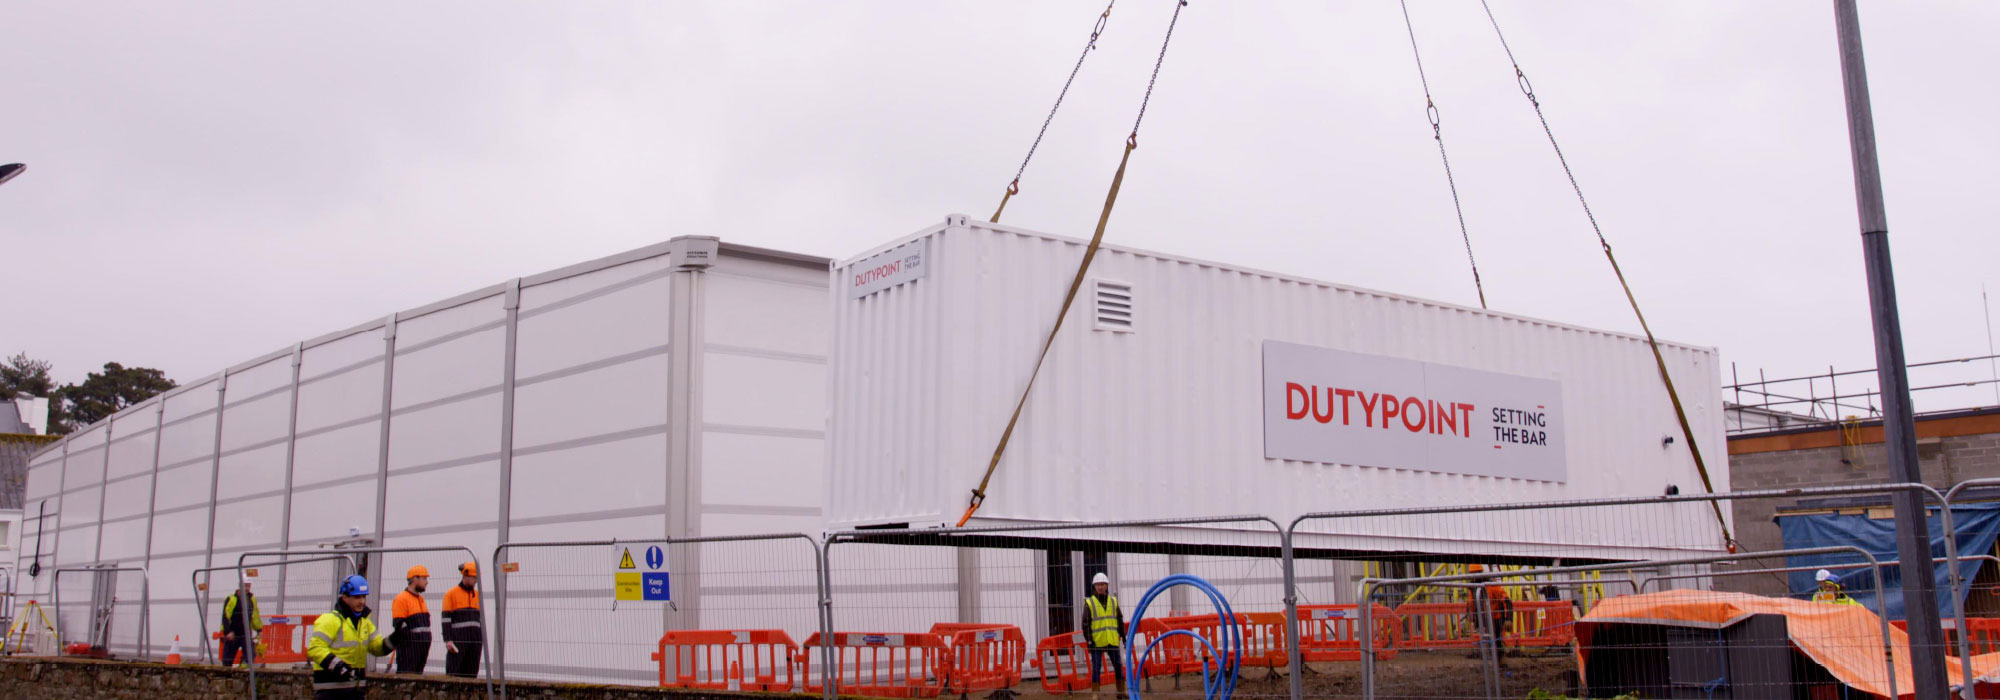 dutypoint shipping container on crane